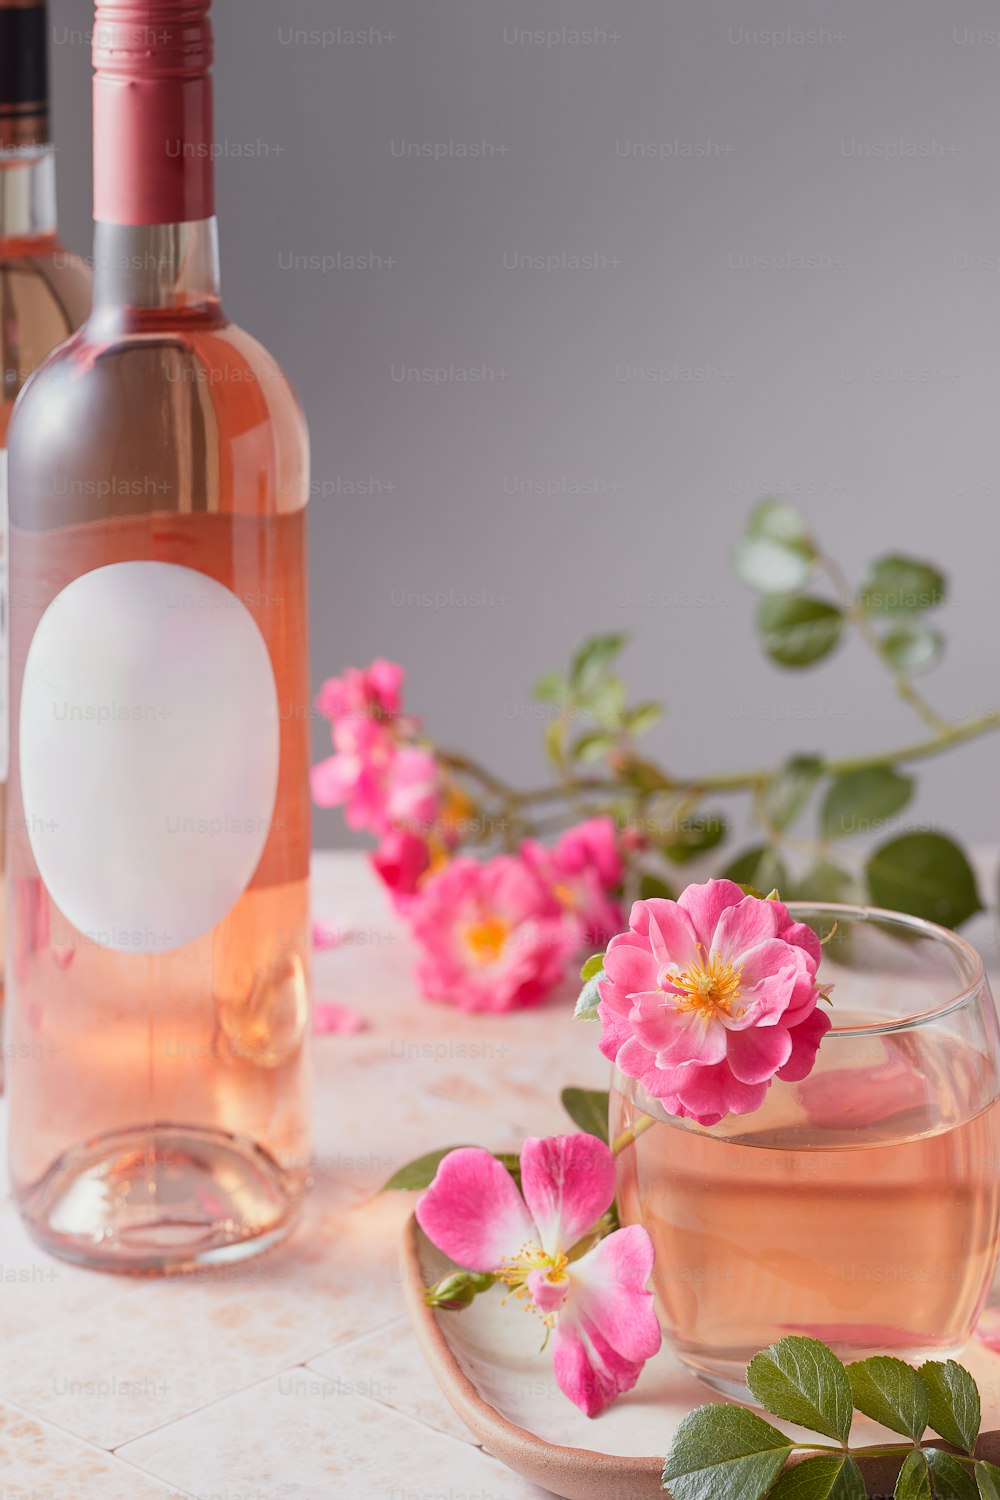 a glass of pink wine next to a bottle of wine